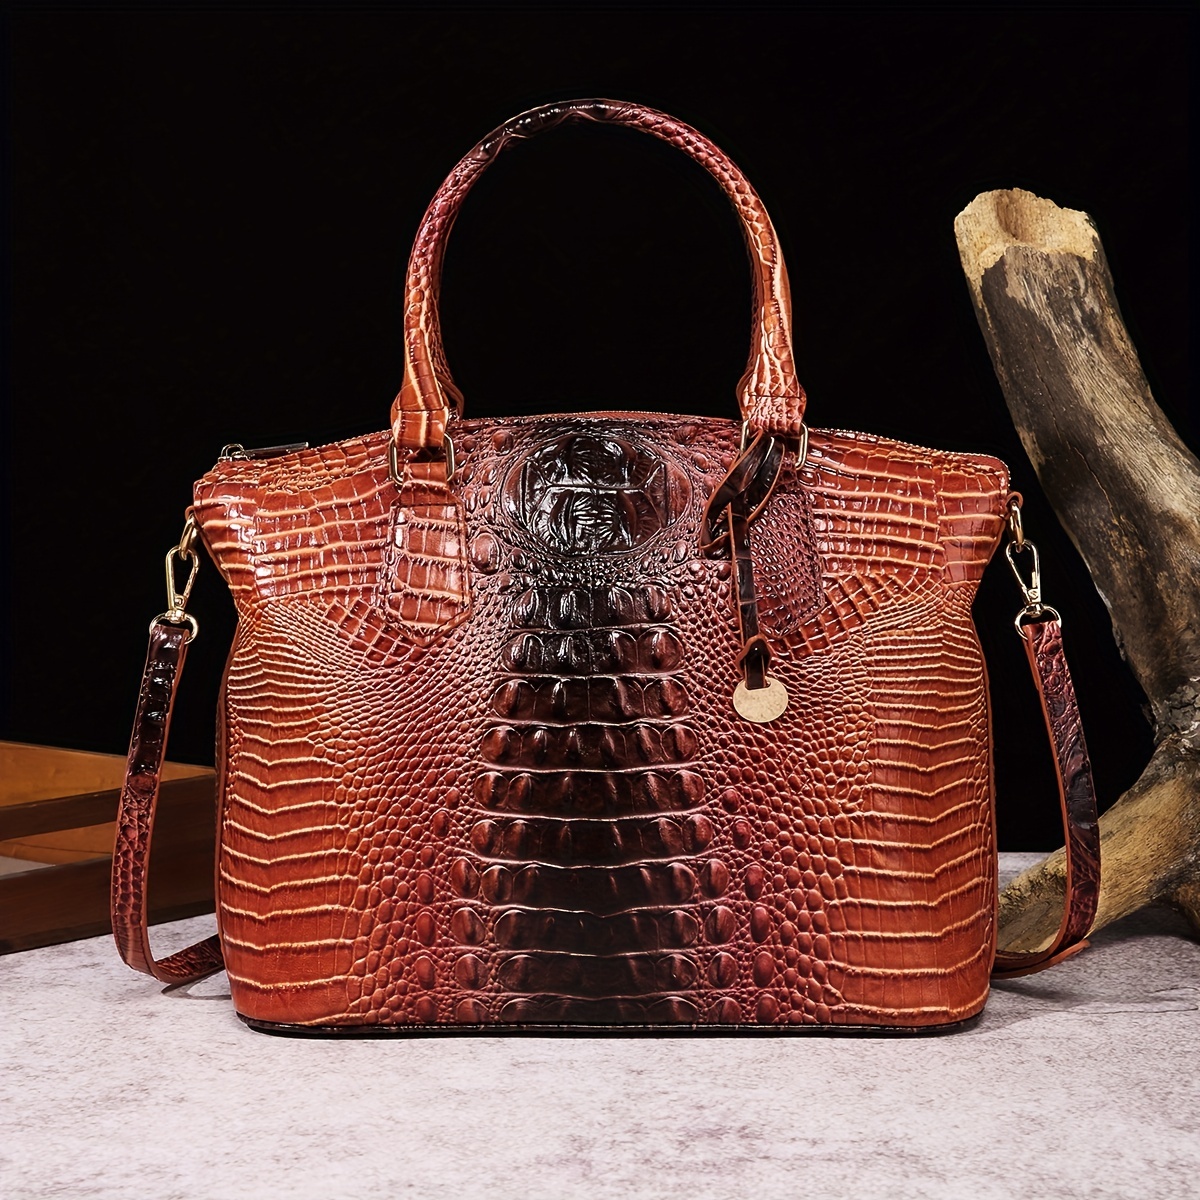 Women Retro Crocodile Pattern Leather Handbag Fashion Tote Handle Bag with Zipper and Shoulder Strap Rose Red